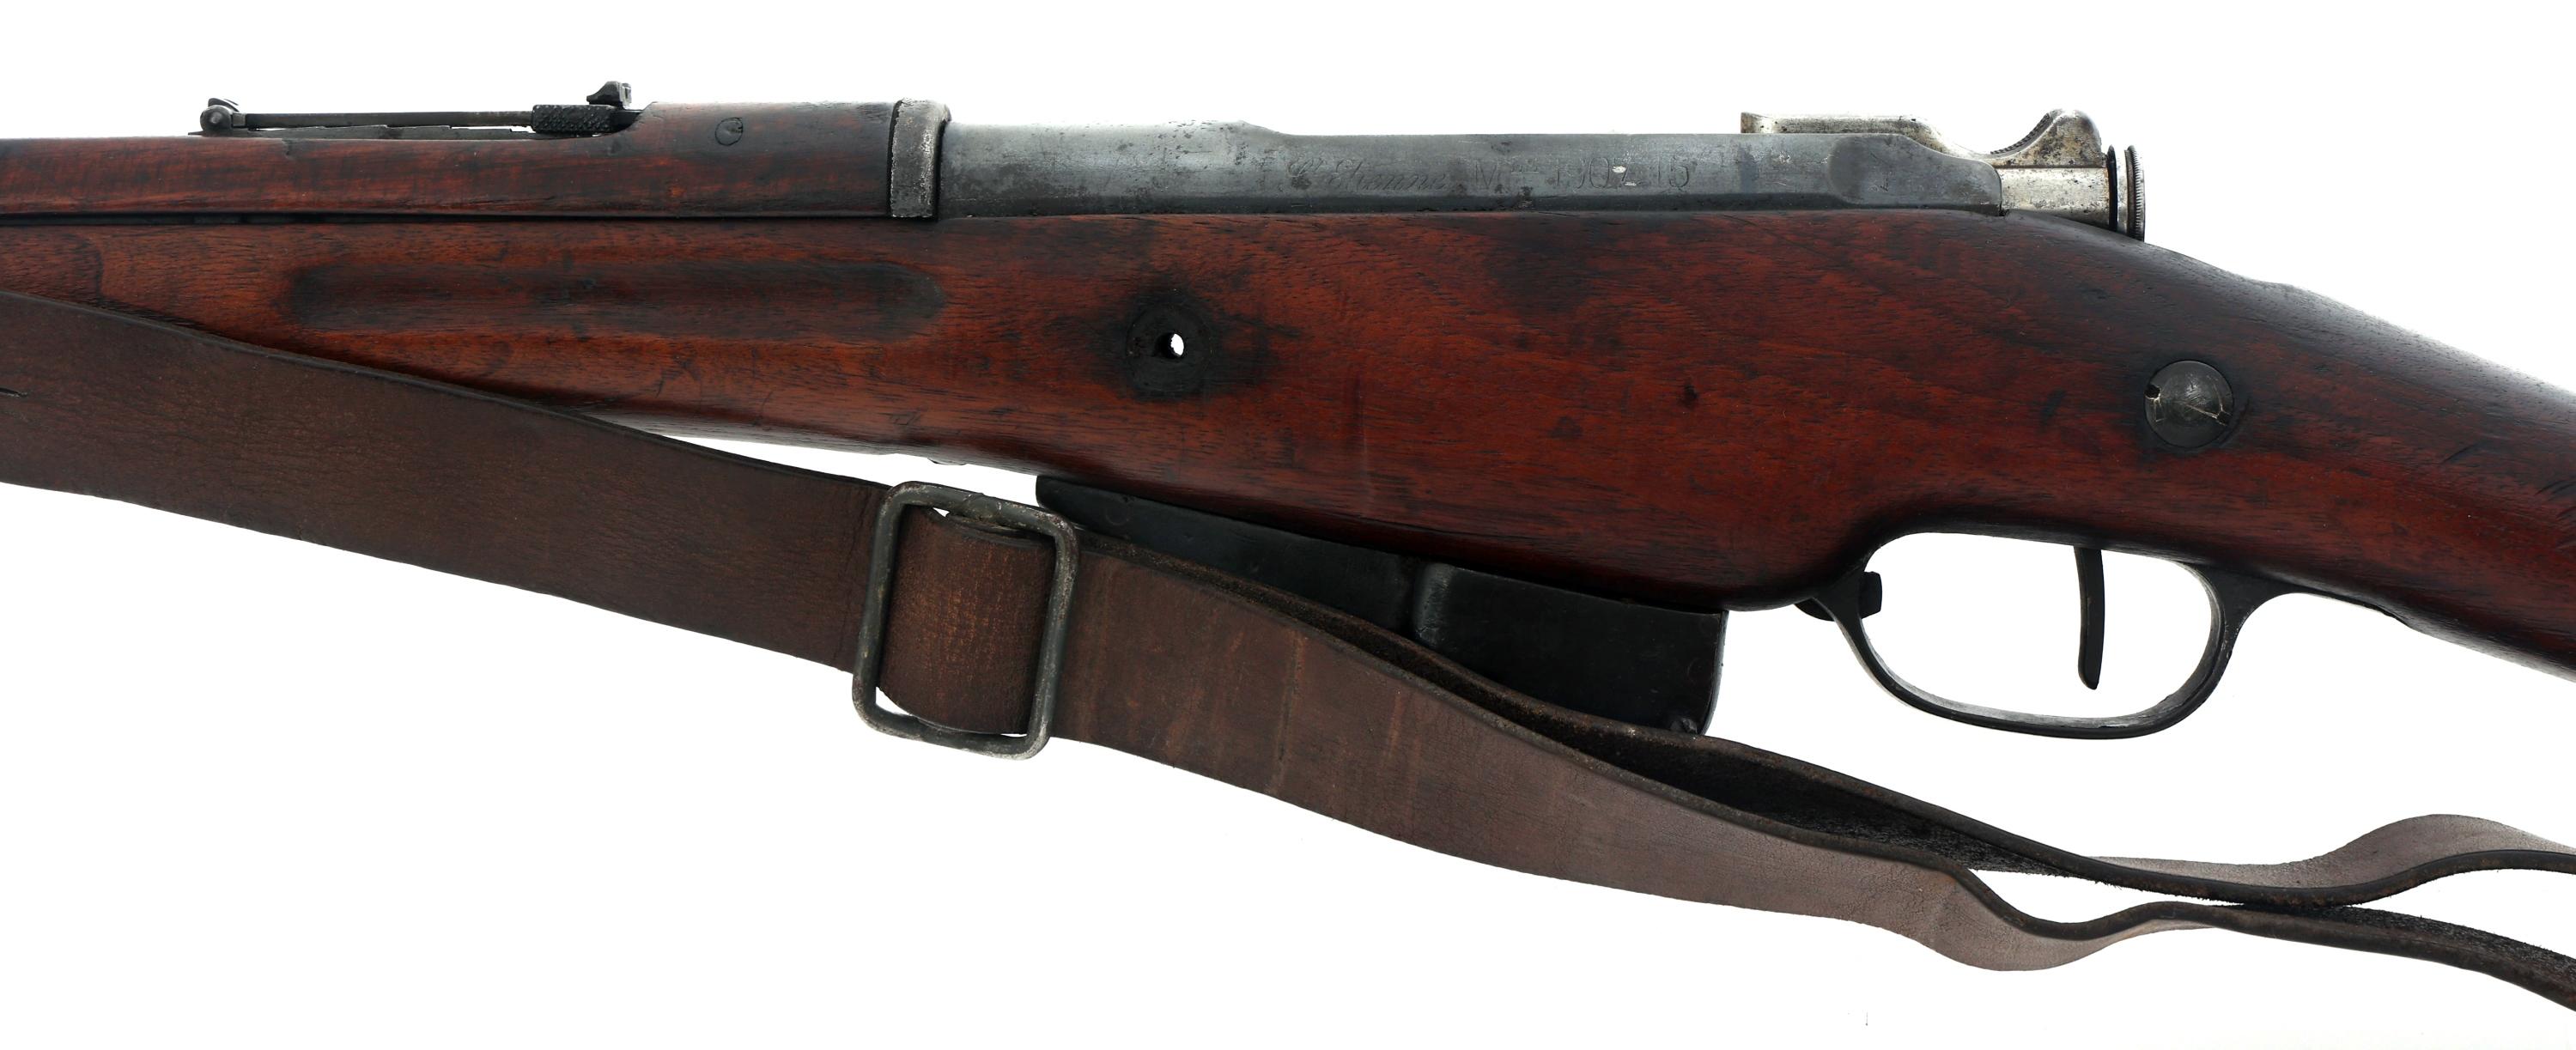 FRENCH ST. ETIENNE MLE 1907-15 8mm BERTHIER RIFLE